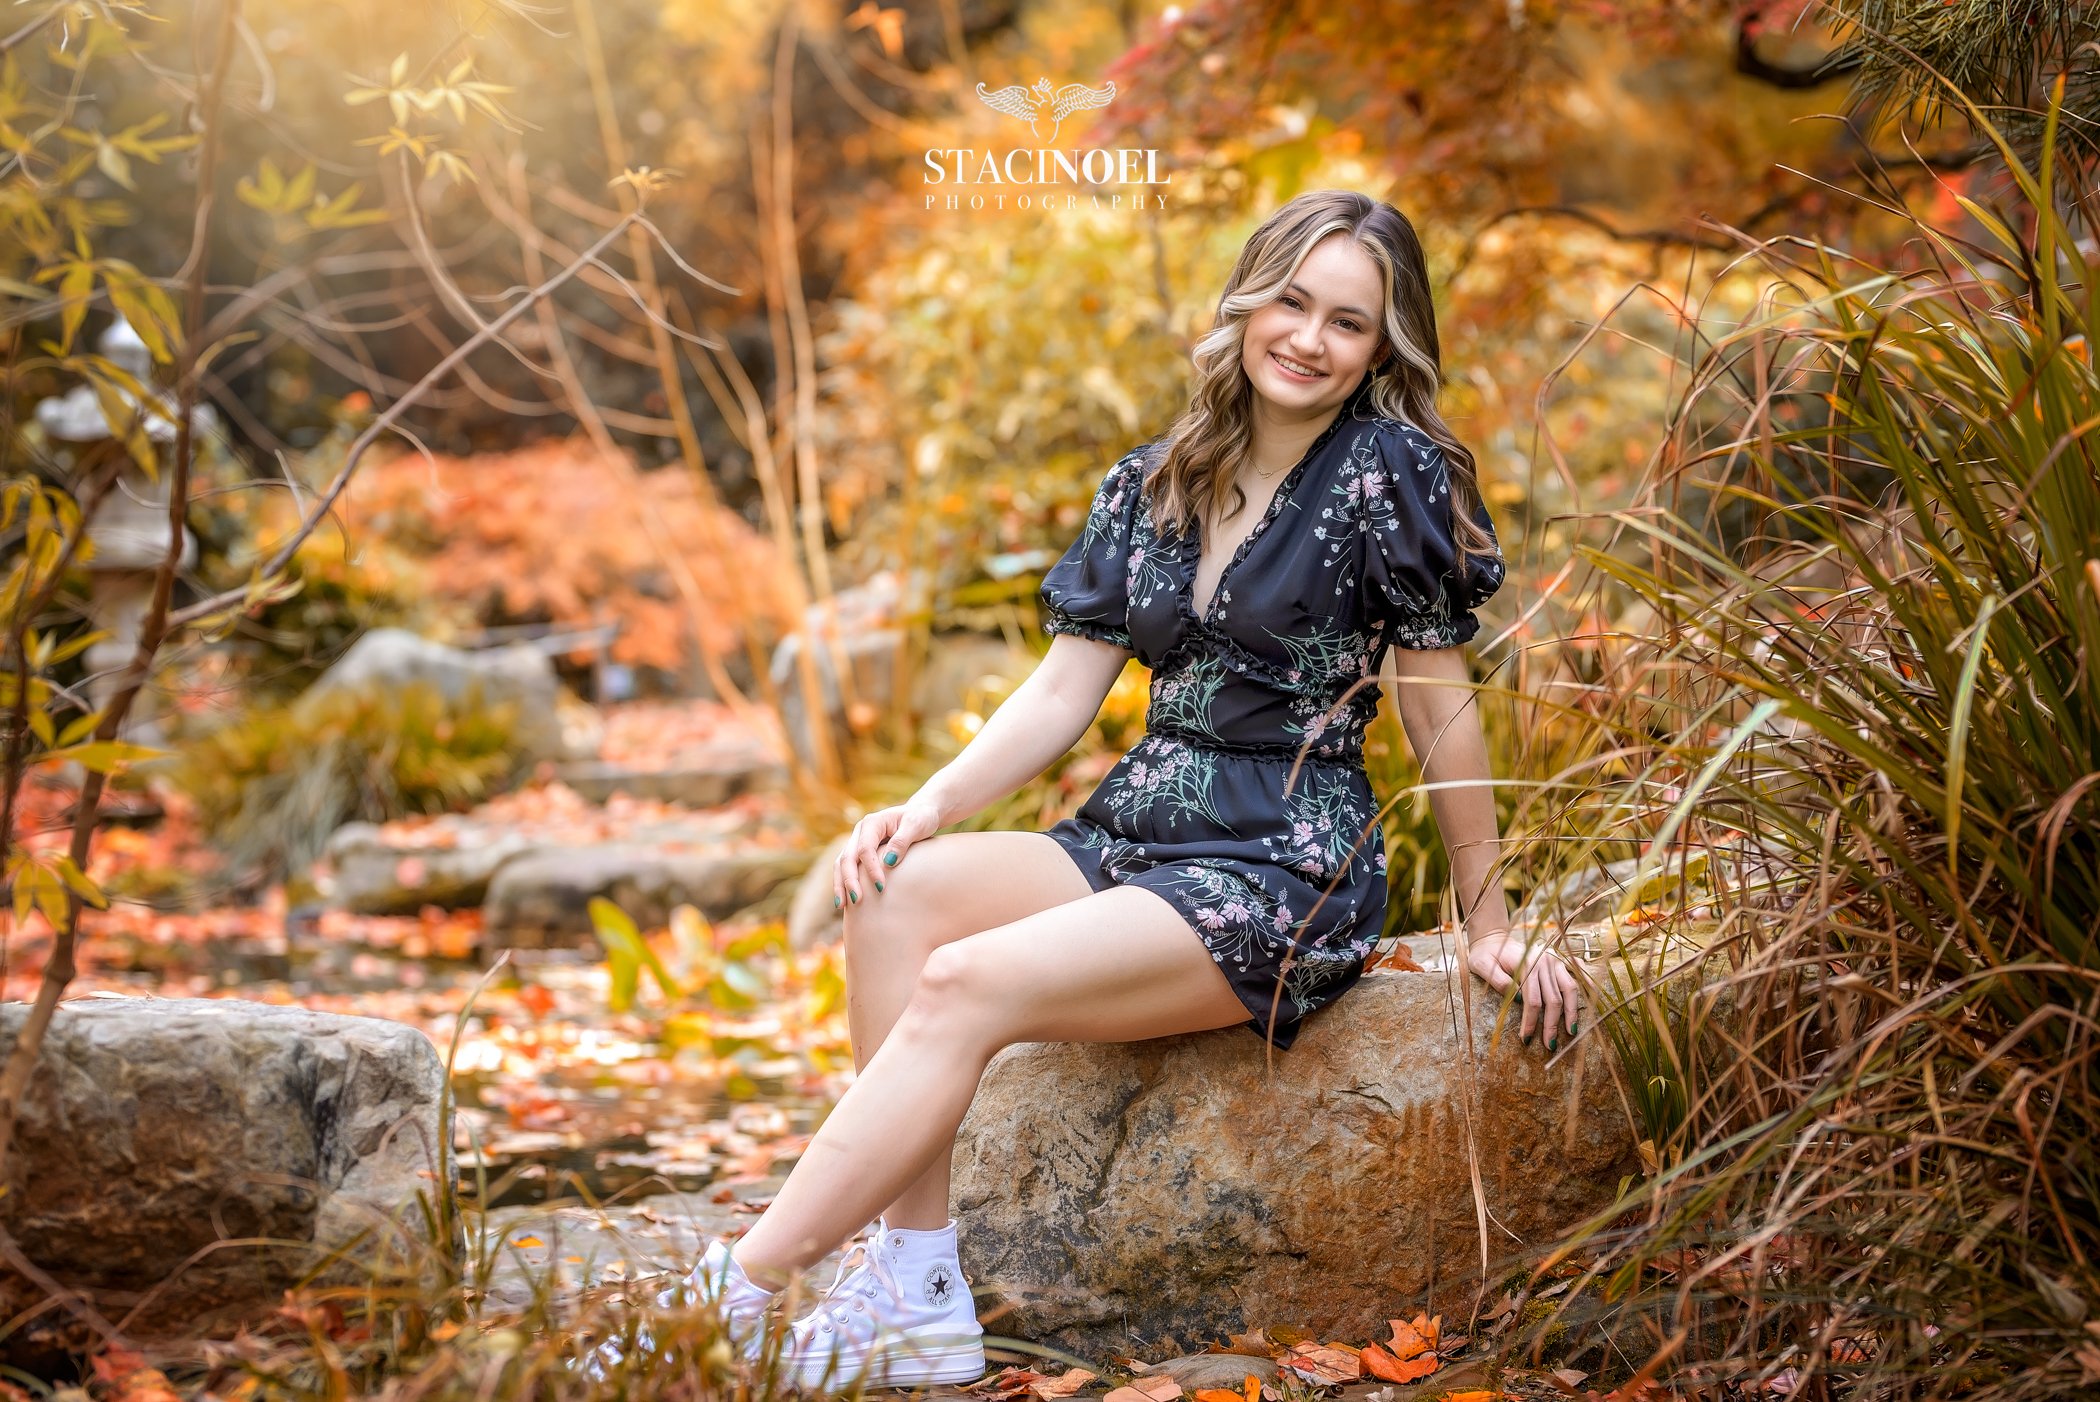 Charlotte senior photographer Staci Noel photography captures a fall senior session at UNCC botanical gardens with autumn colors and high school senior girl in beautiful outdoor setting